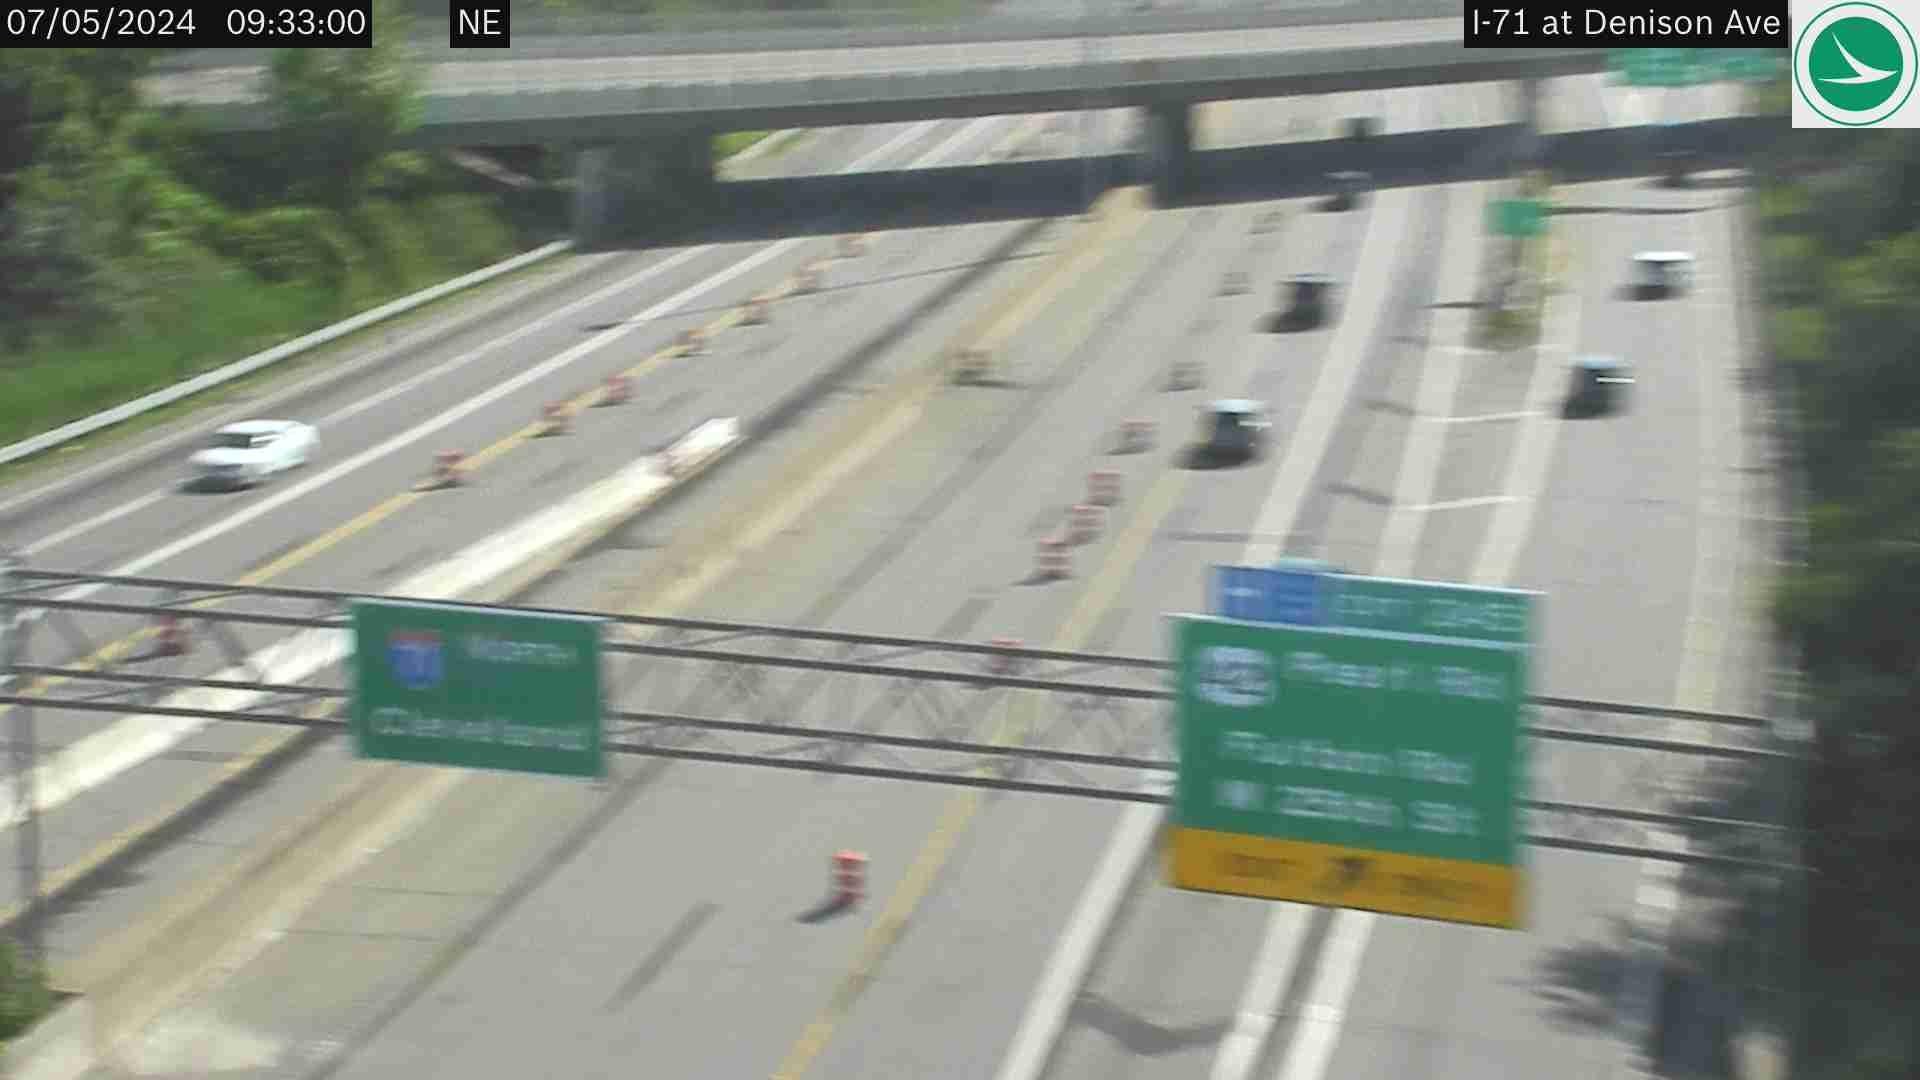 Traffic Cam Brooklyn Centre: I-71 at Denison Ave